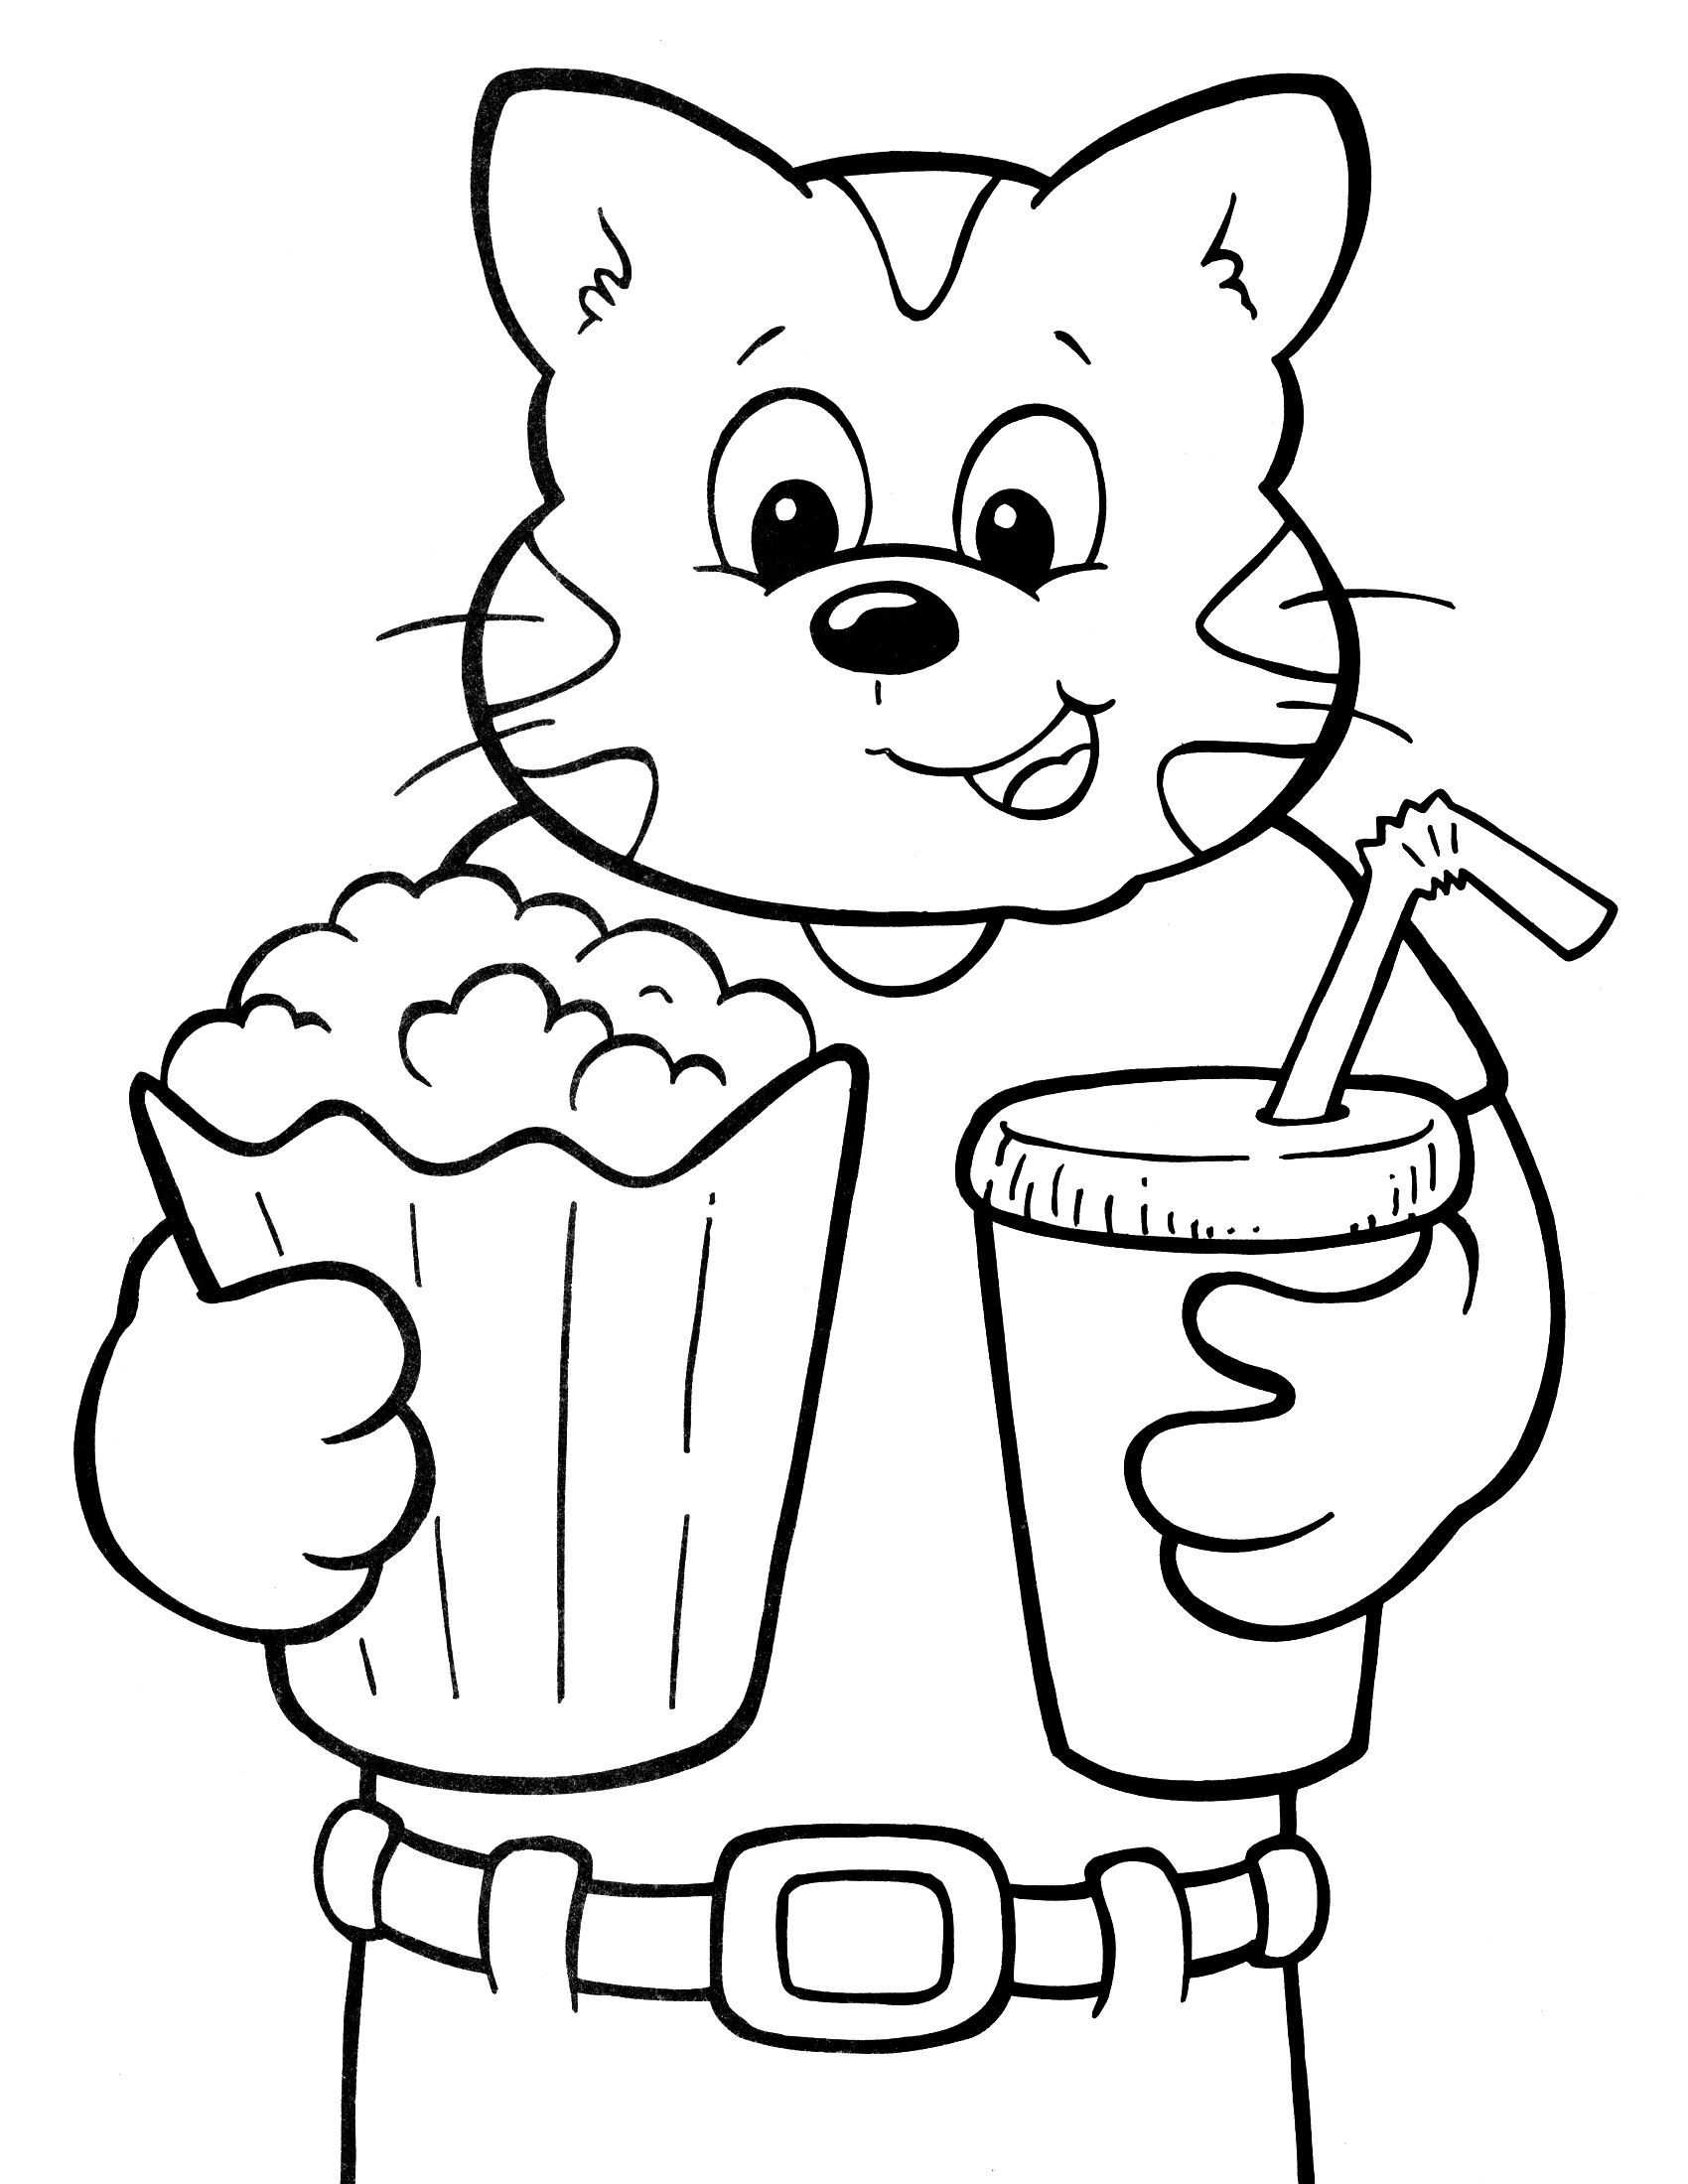 Personalized Happy Birthday Coloring Pages at GetColorings ...